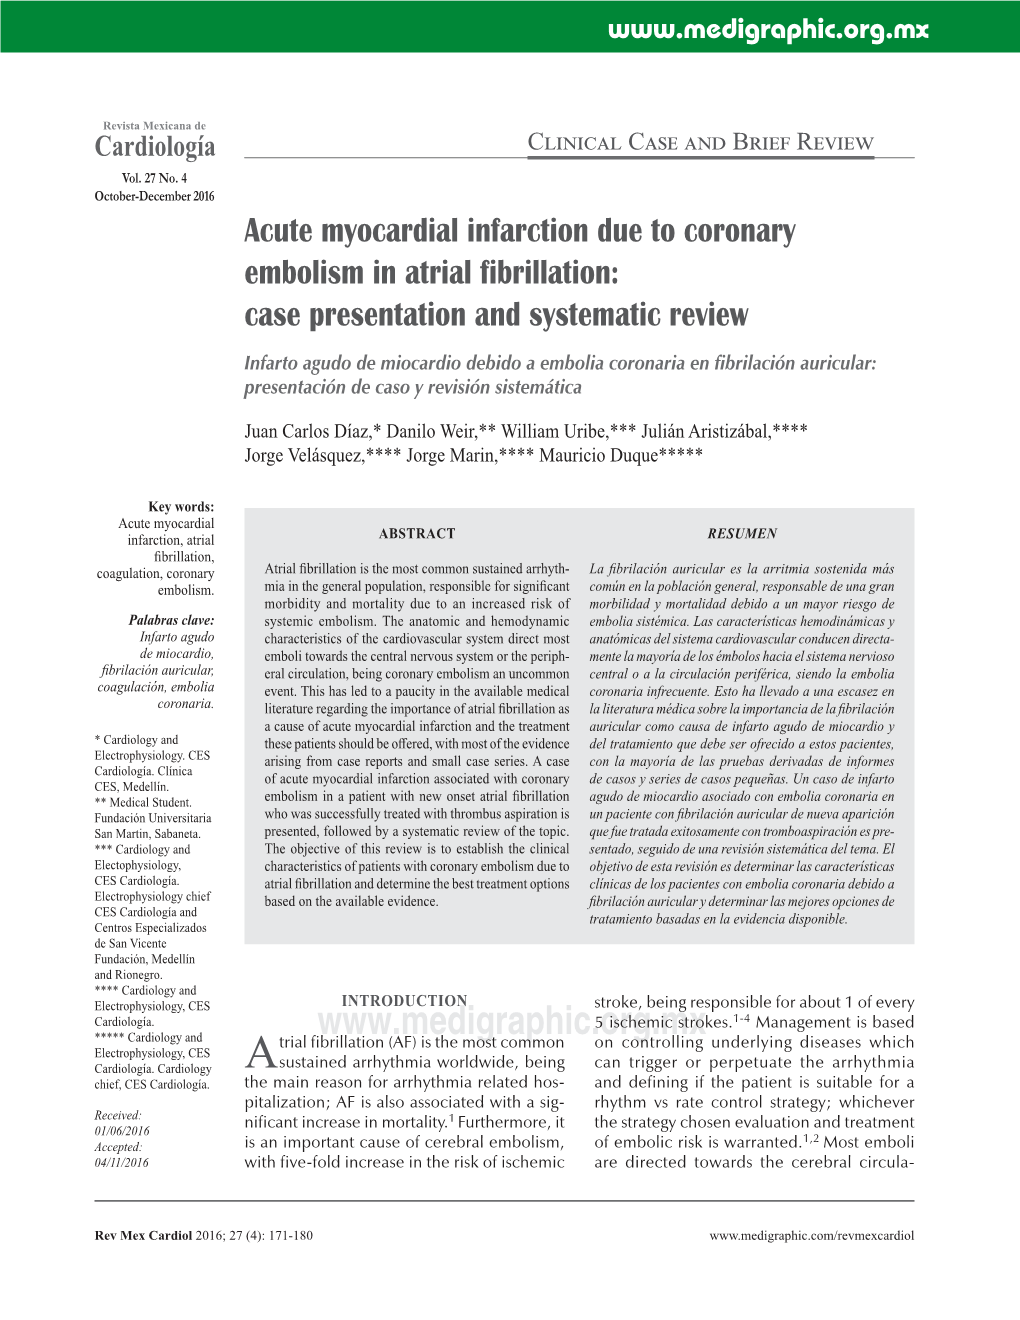 Acute Myocardial Infarction Due to Coronary Embolism in Atrial Fibrillation: Case Presentation and Systematic Review